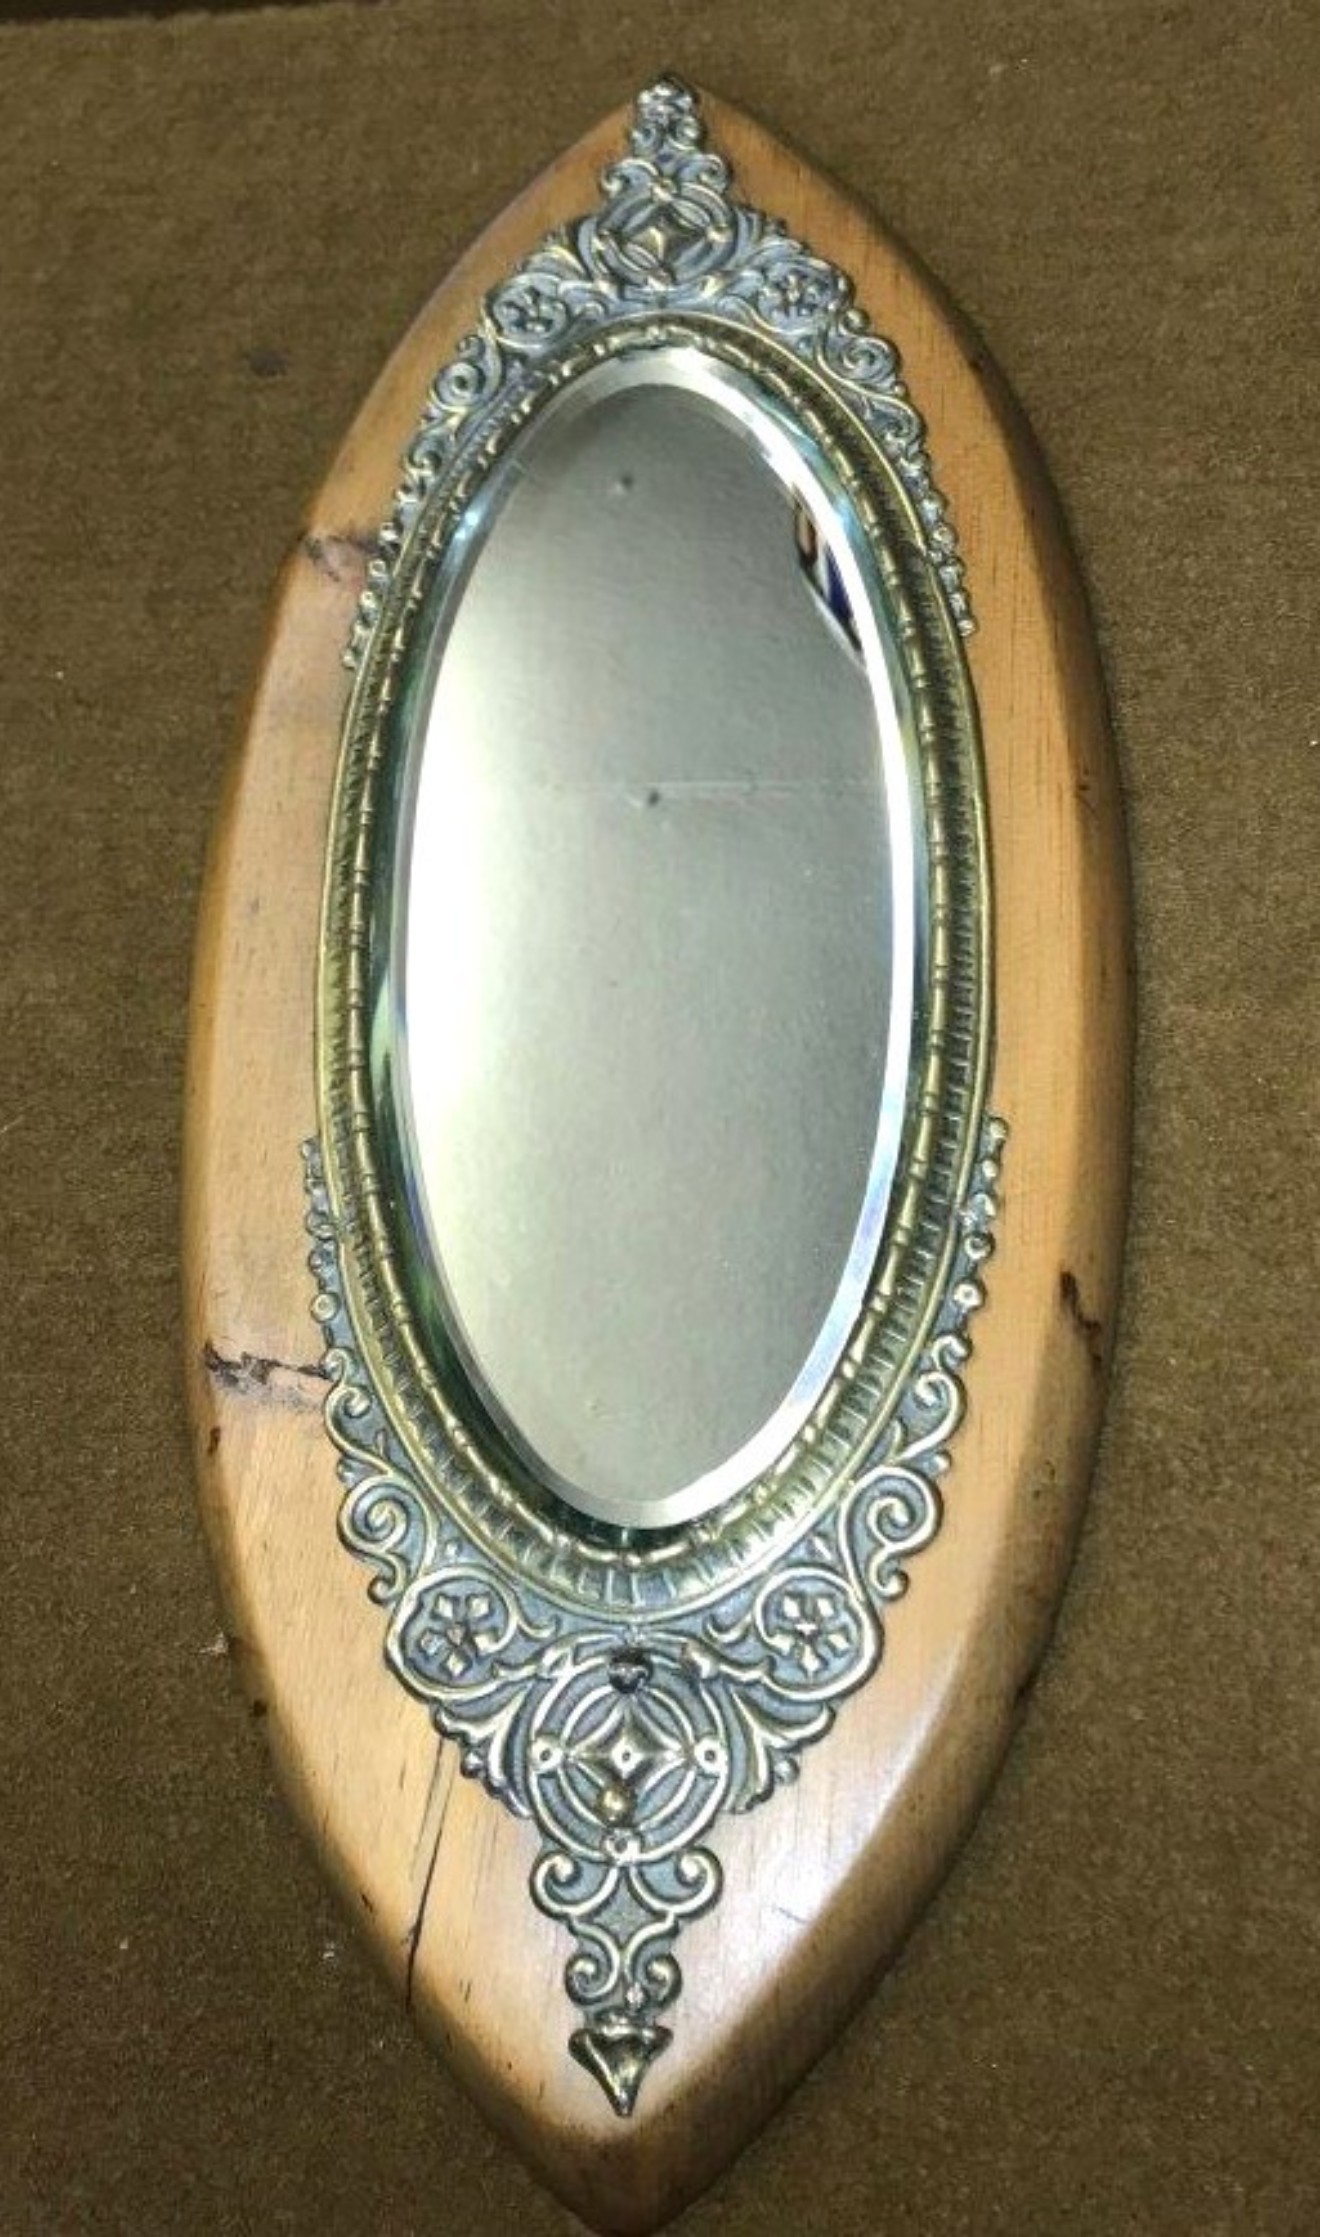 Victorian Oval Bevelled Edge Mirror Wooden Frame with Brass Repousse Trim